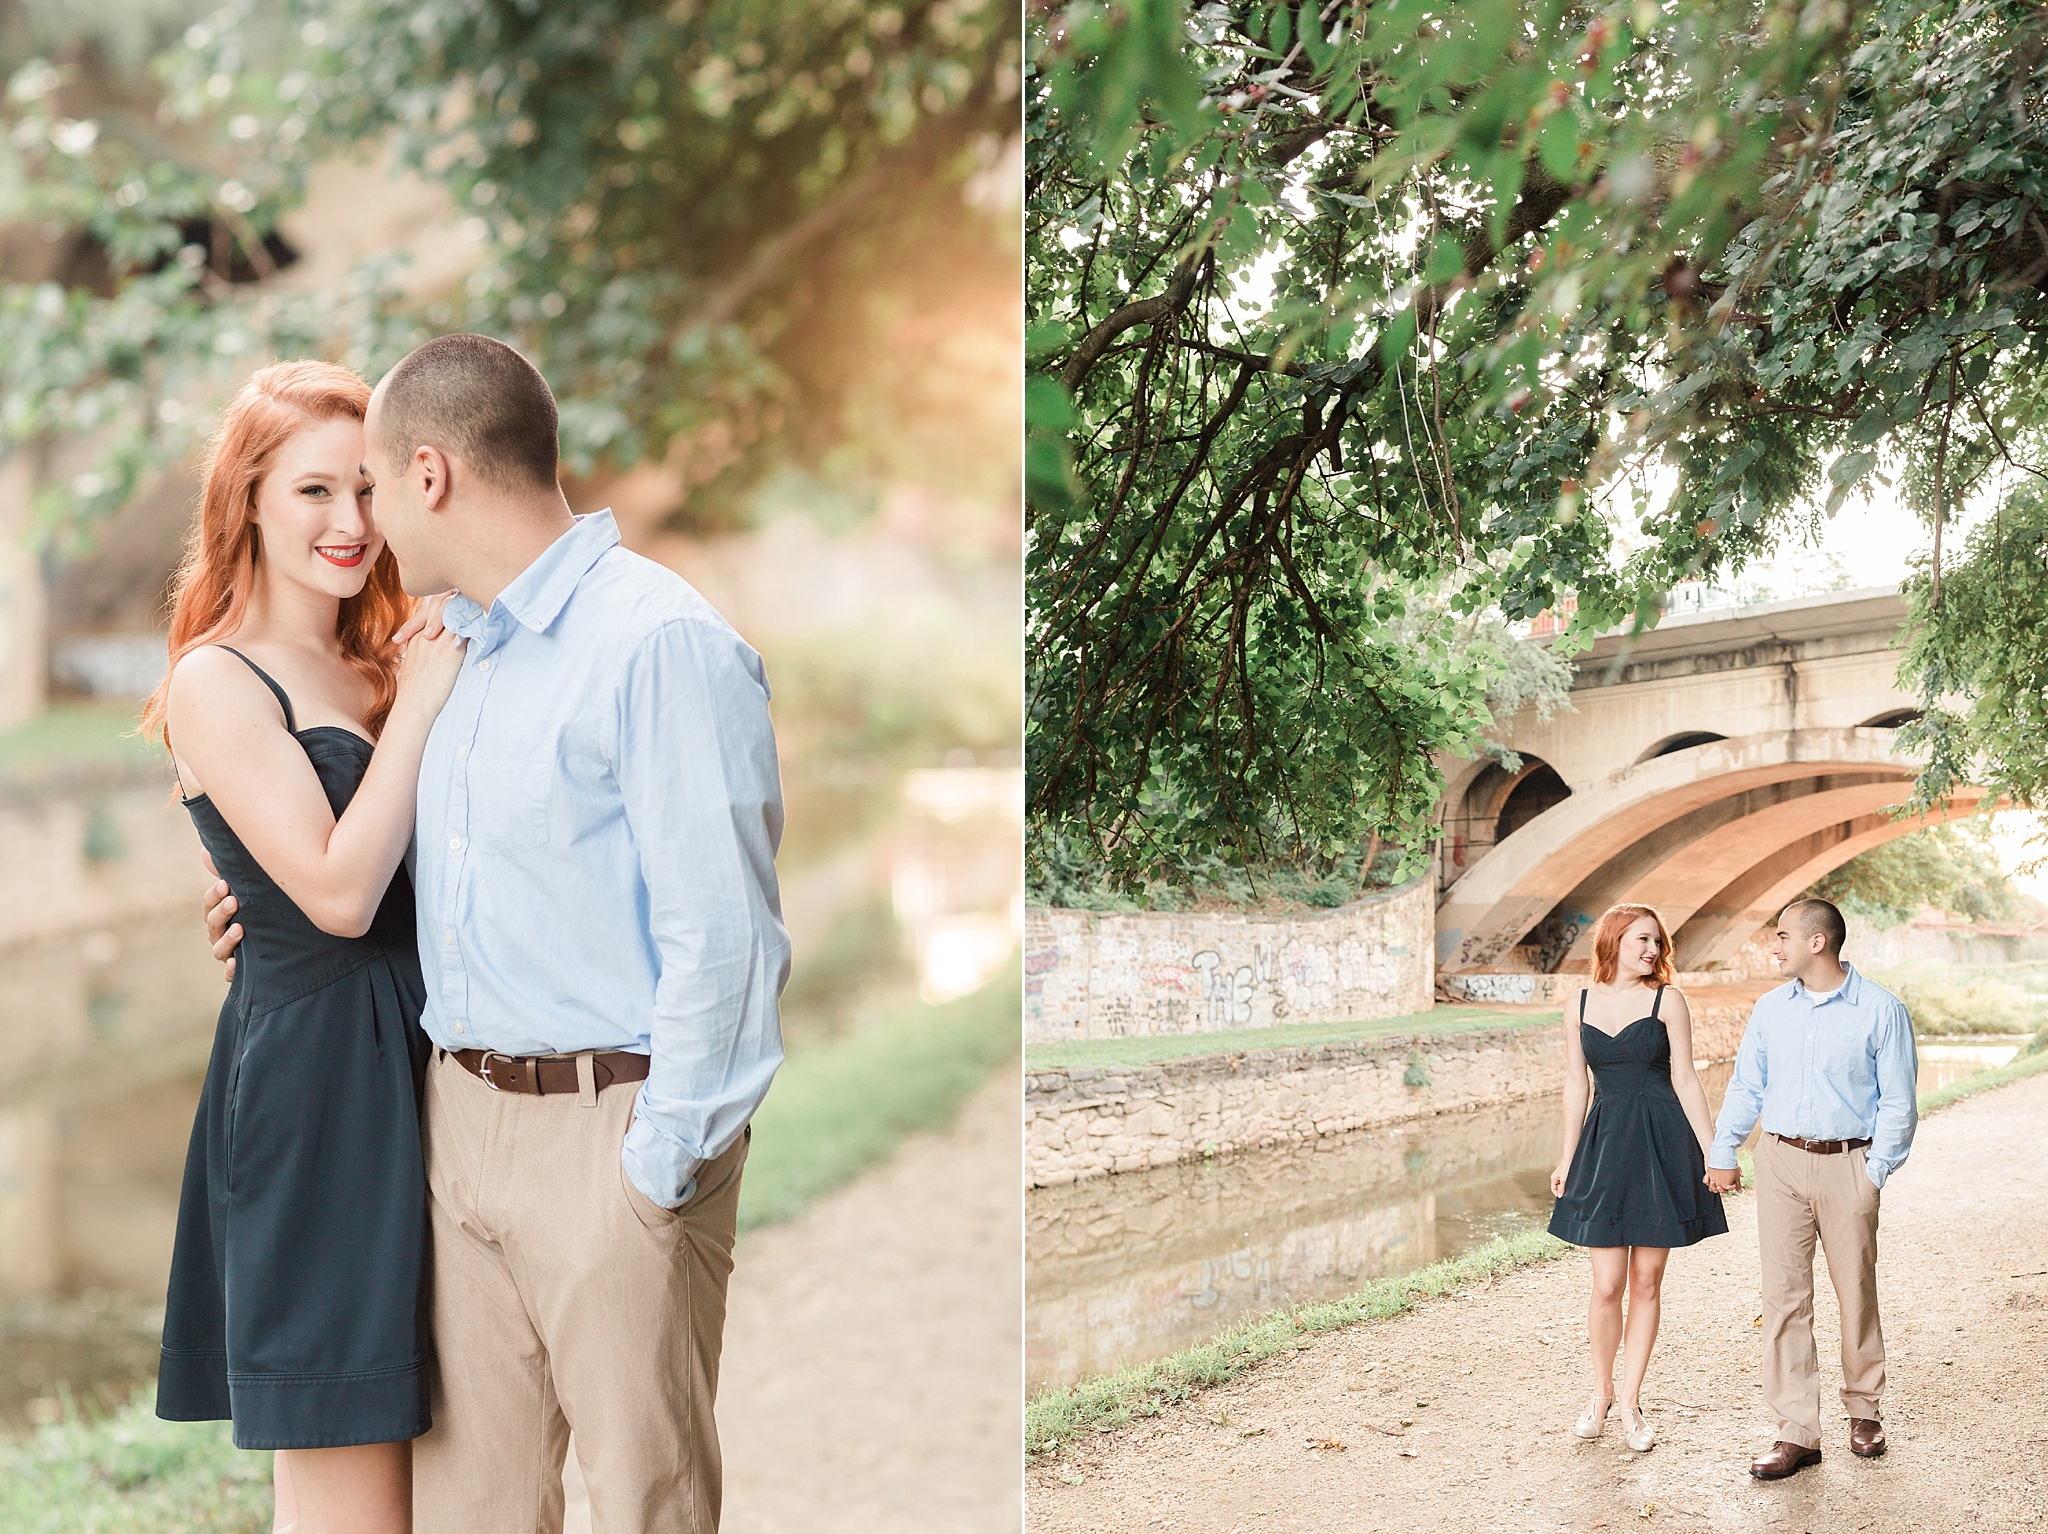 This romantic engagement session in Georgetown takes place along the waterfront and canals at sunrise. As photographed by DC photographer, Alicia Lacey